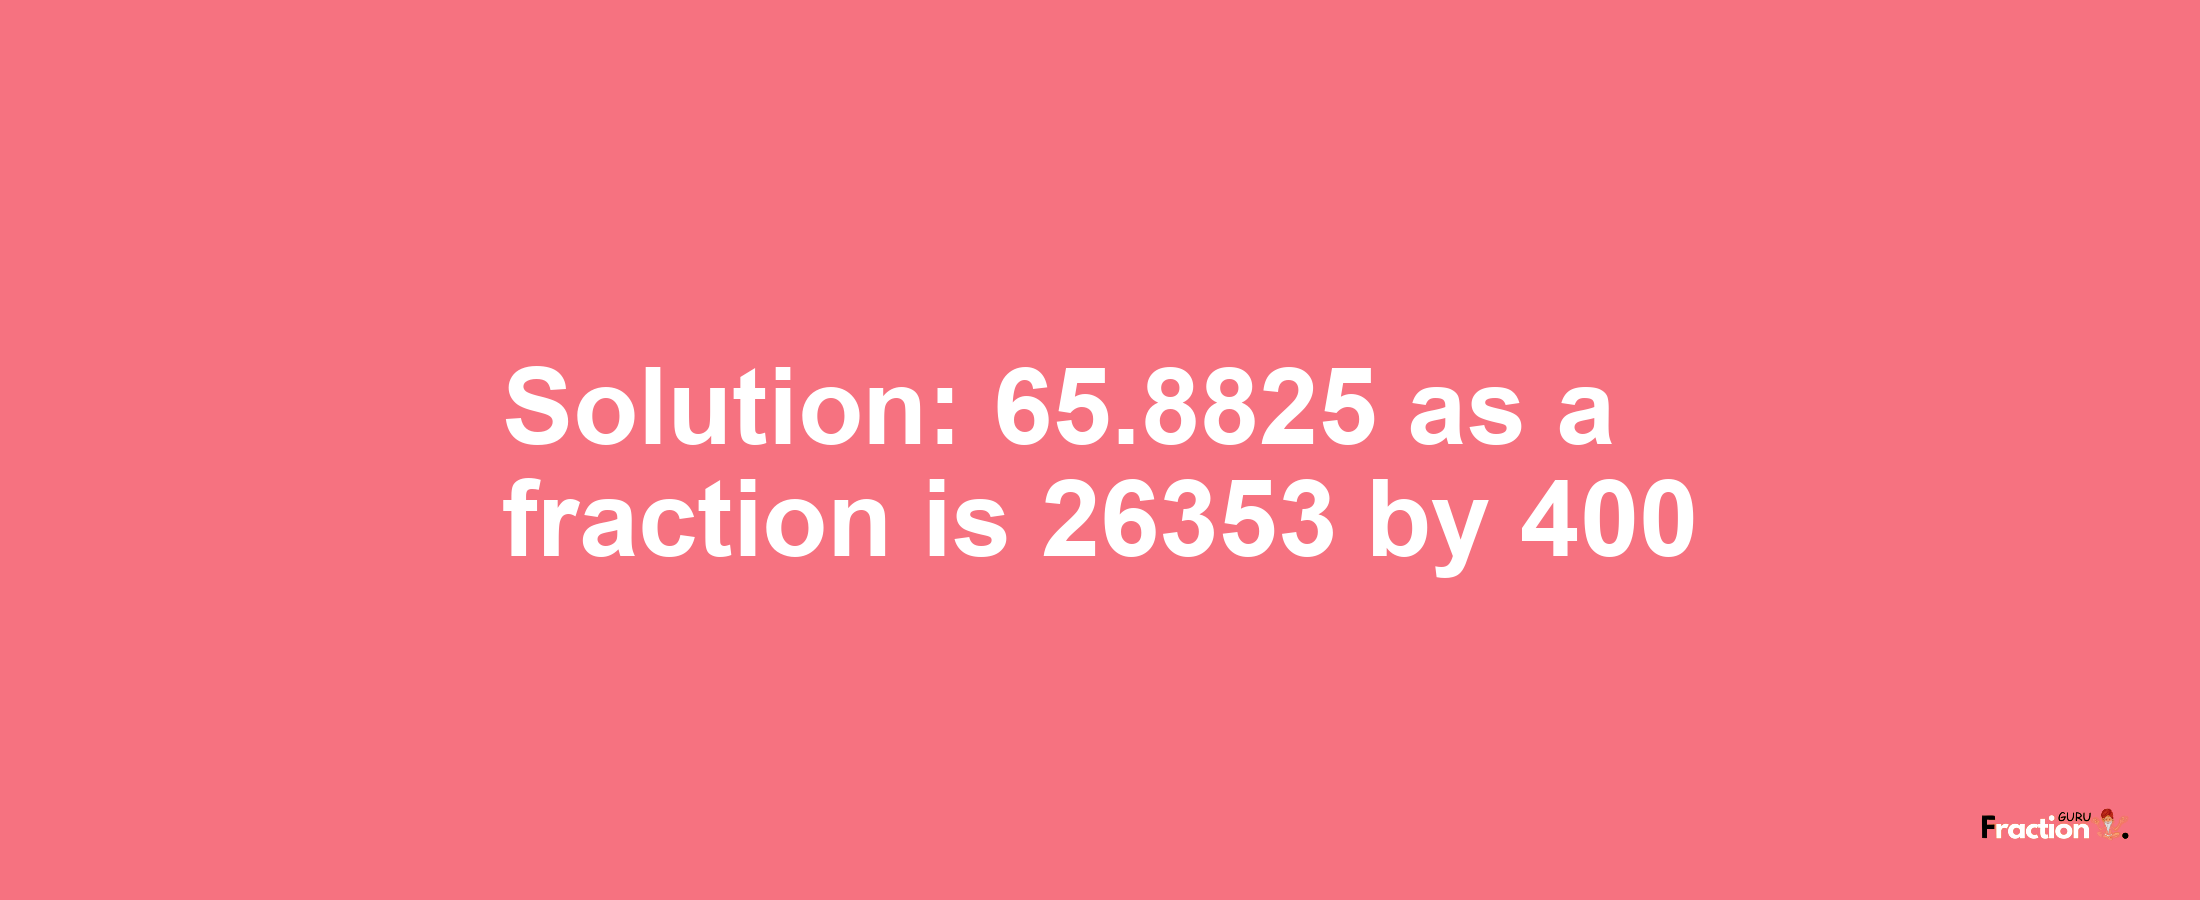 Solution:65.8825 as a fraction is 26353/400